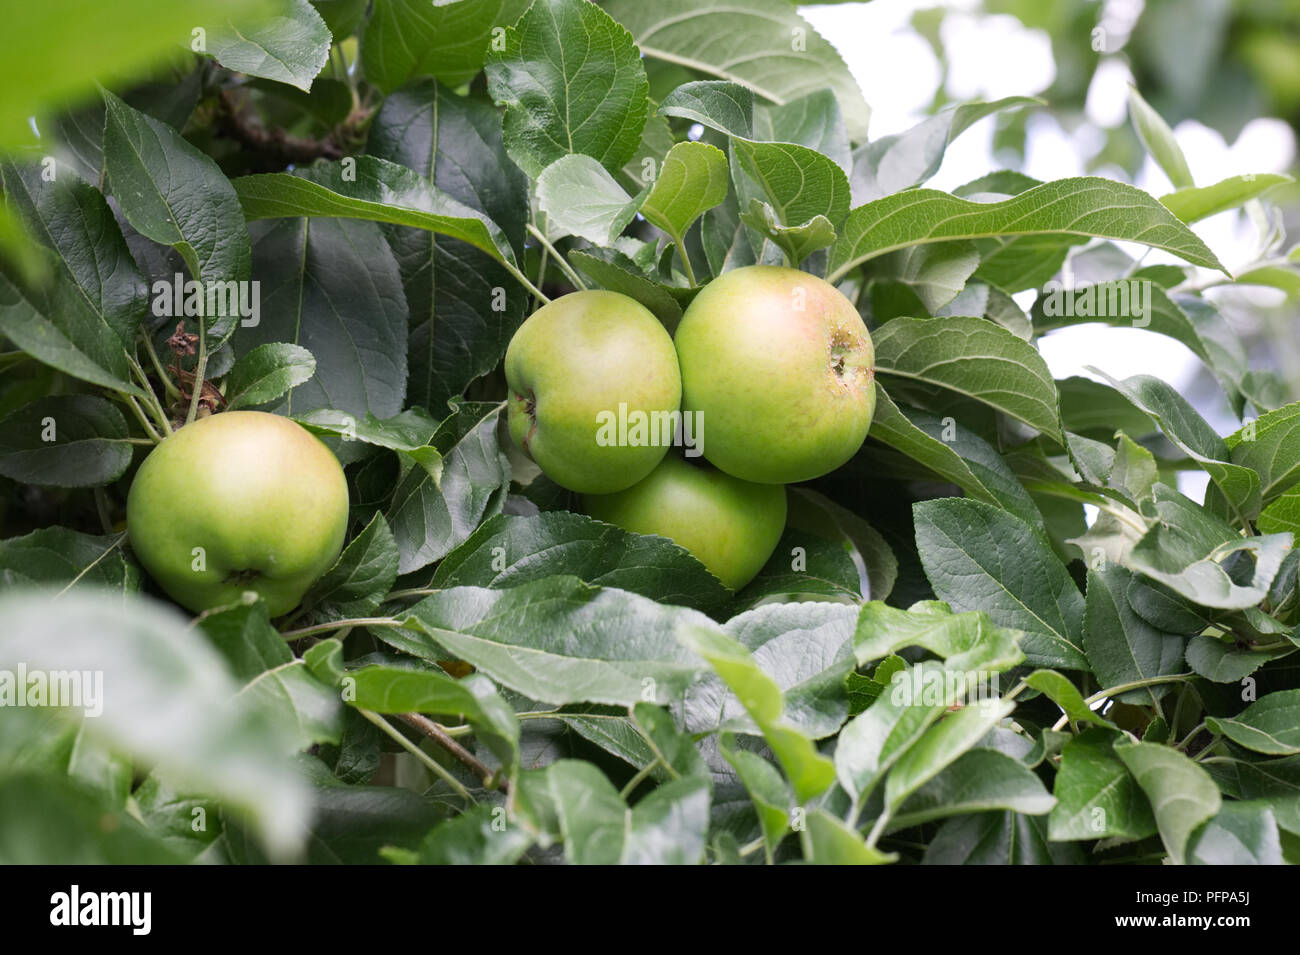 Malus domestica 'George Neal' fruit. Apple 'George Neal' on the tree. Stock Photo